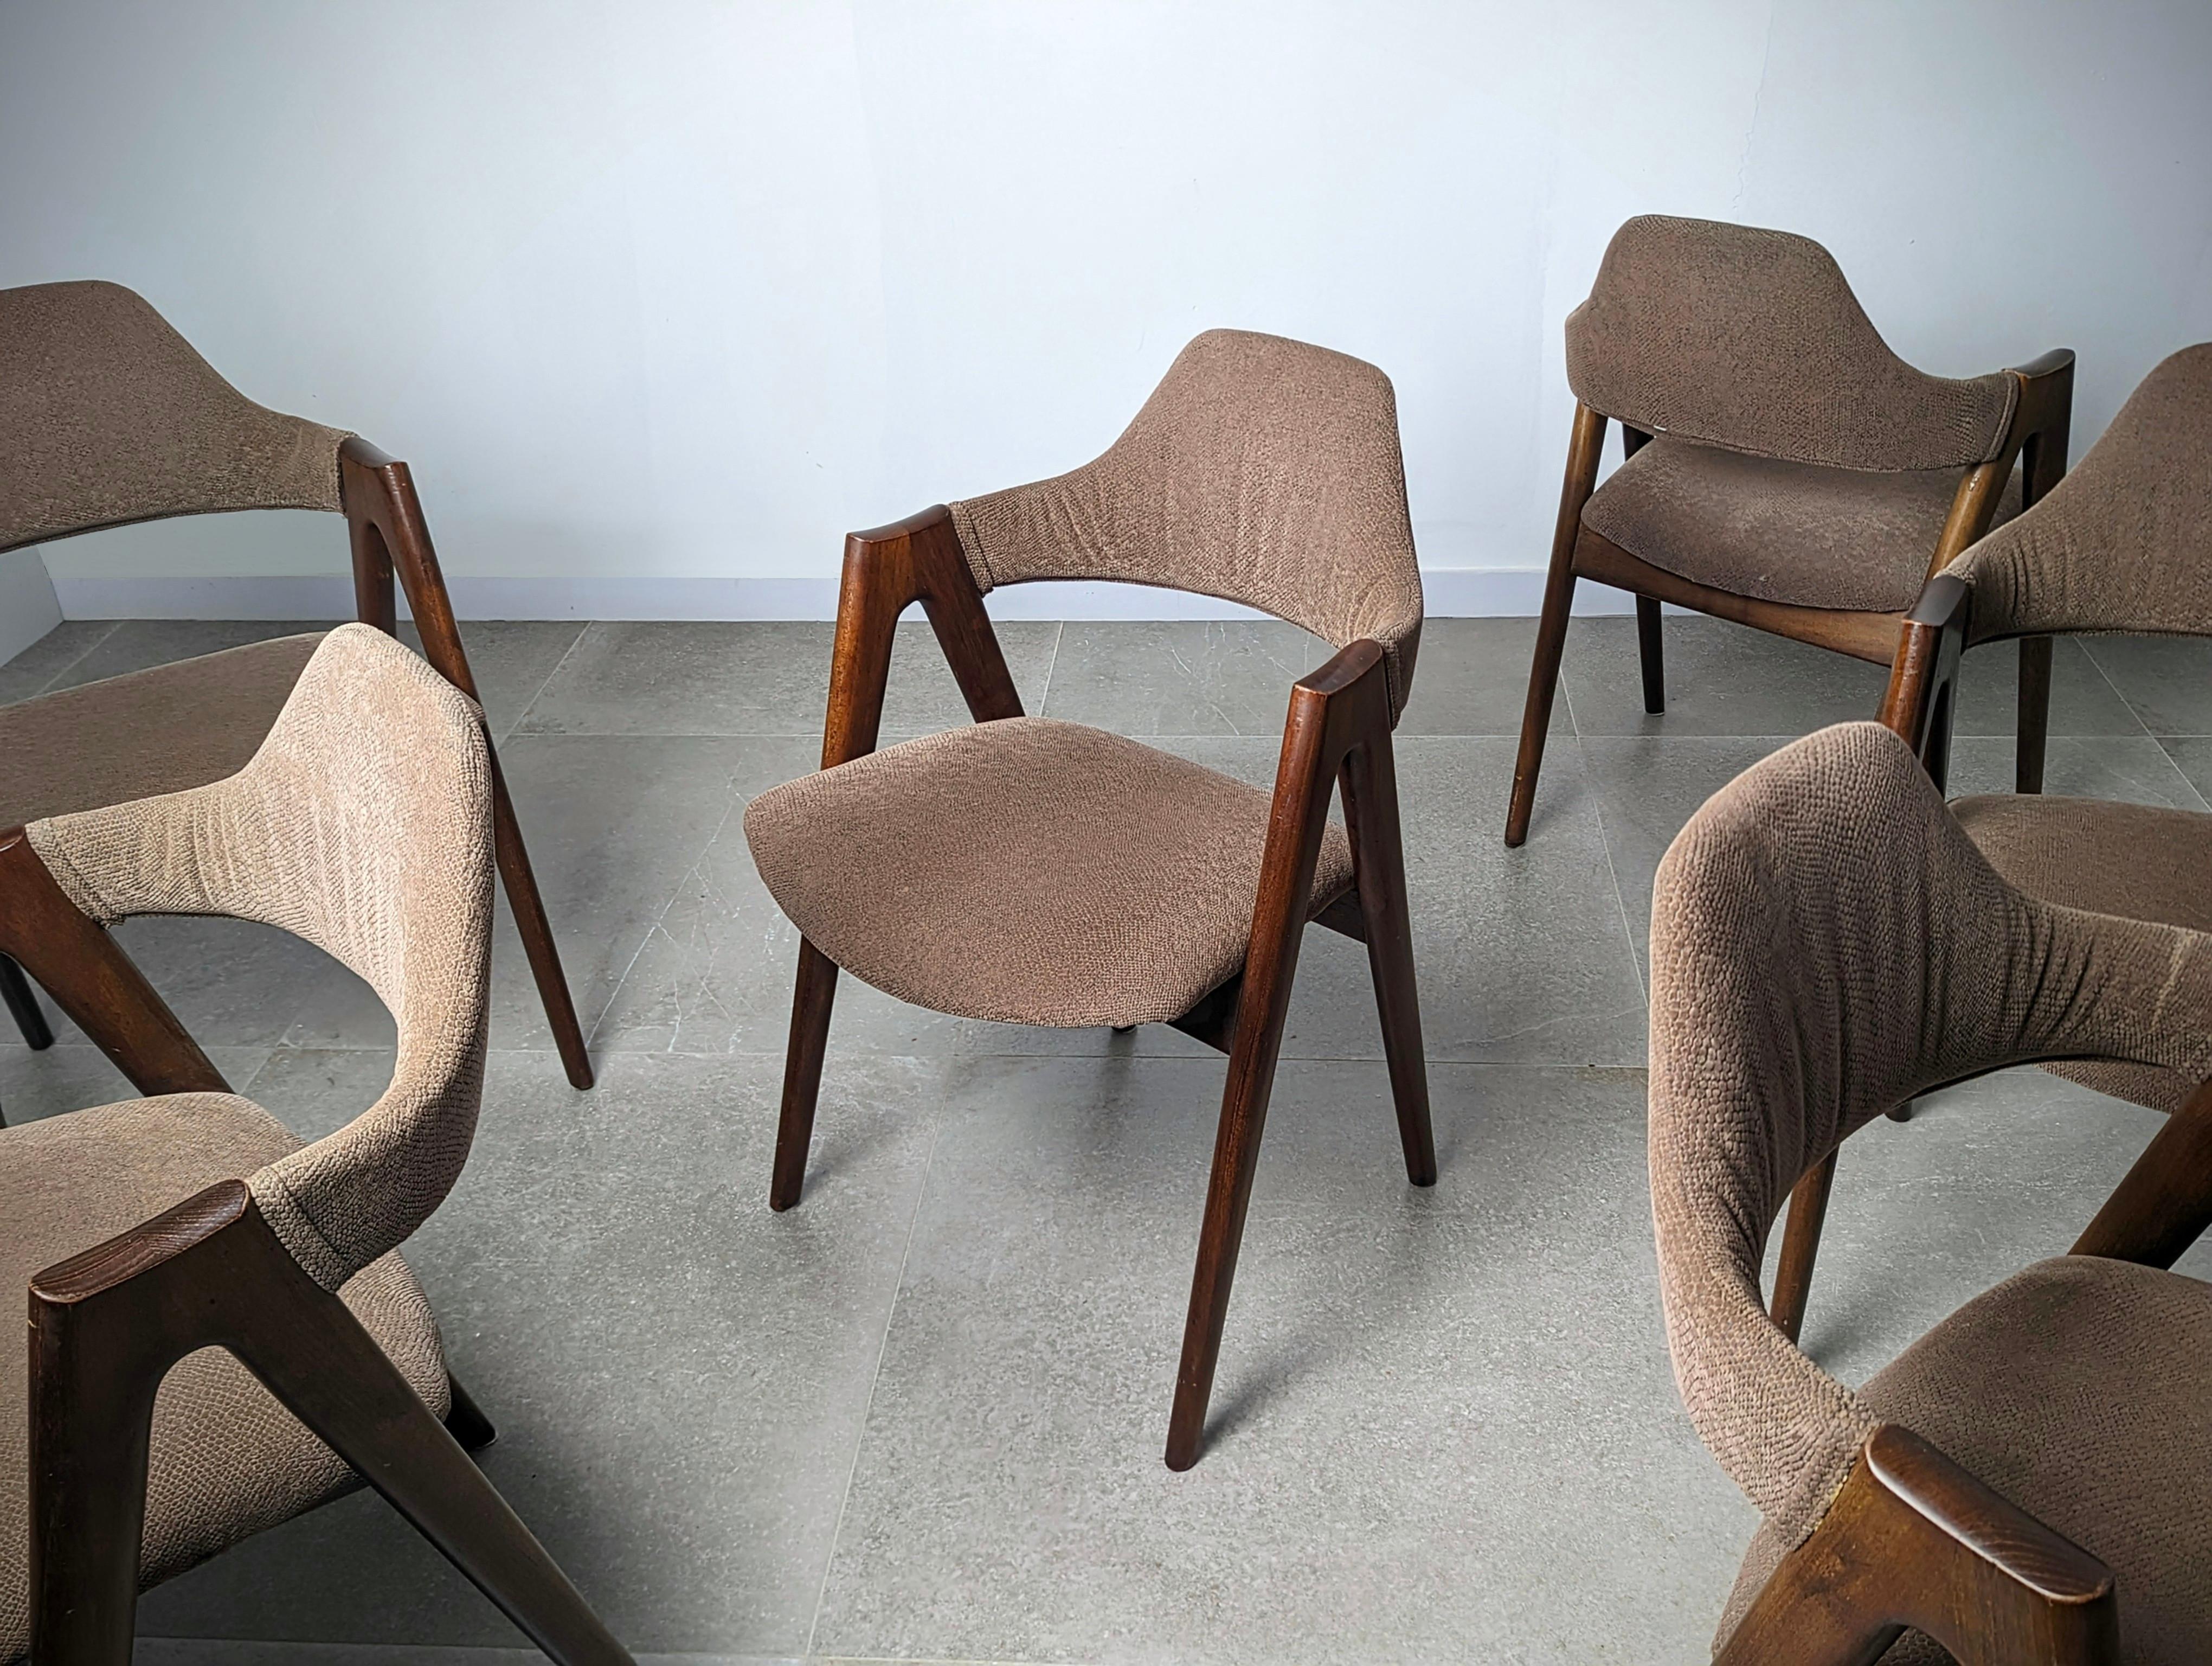 Beautiful set of 'Compass' chairs design by Kai Kristiansen in solid teak wood.

Six Units Available.